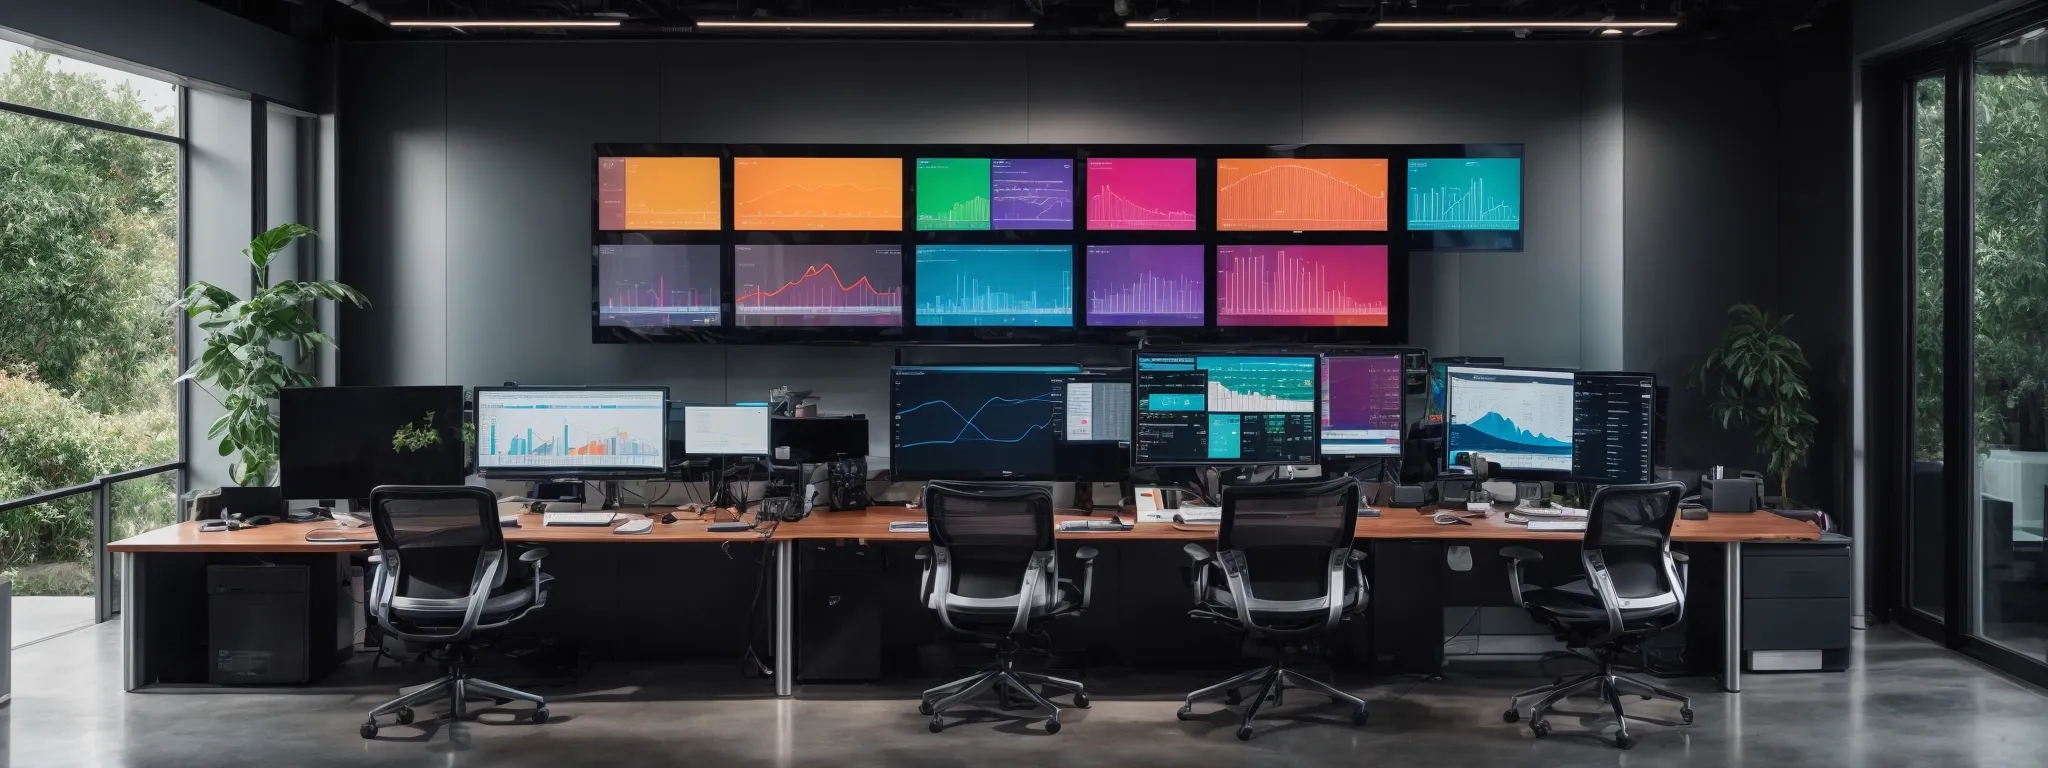 a sleek, modern office with multiple computer screens displaying colorful graphs and social media analytics.